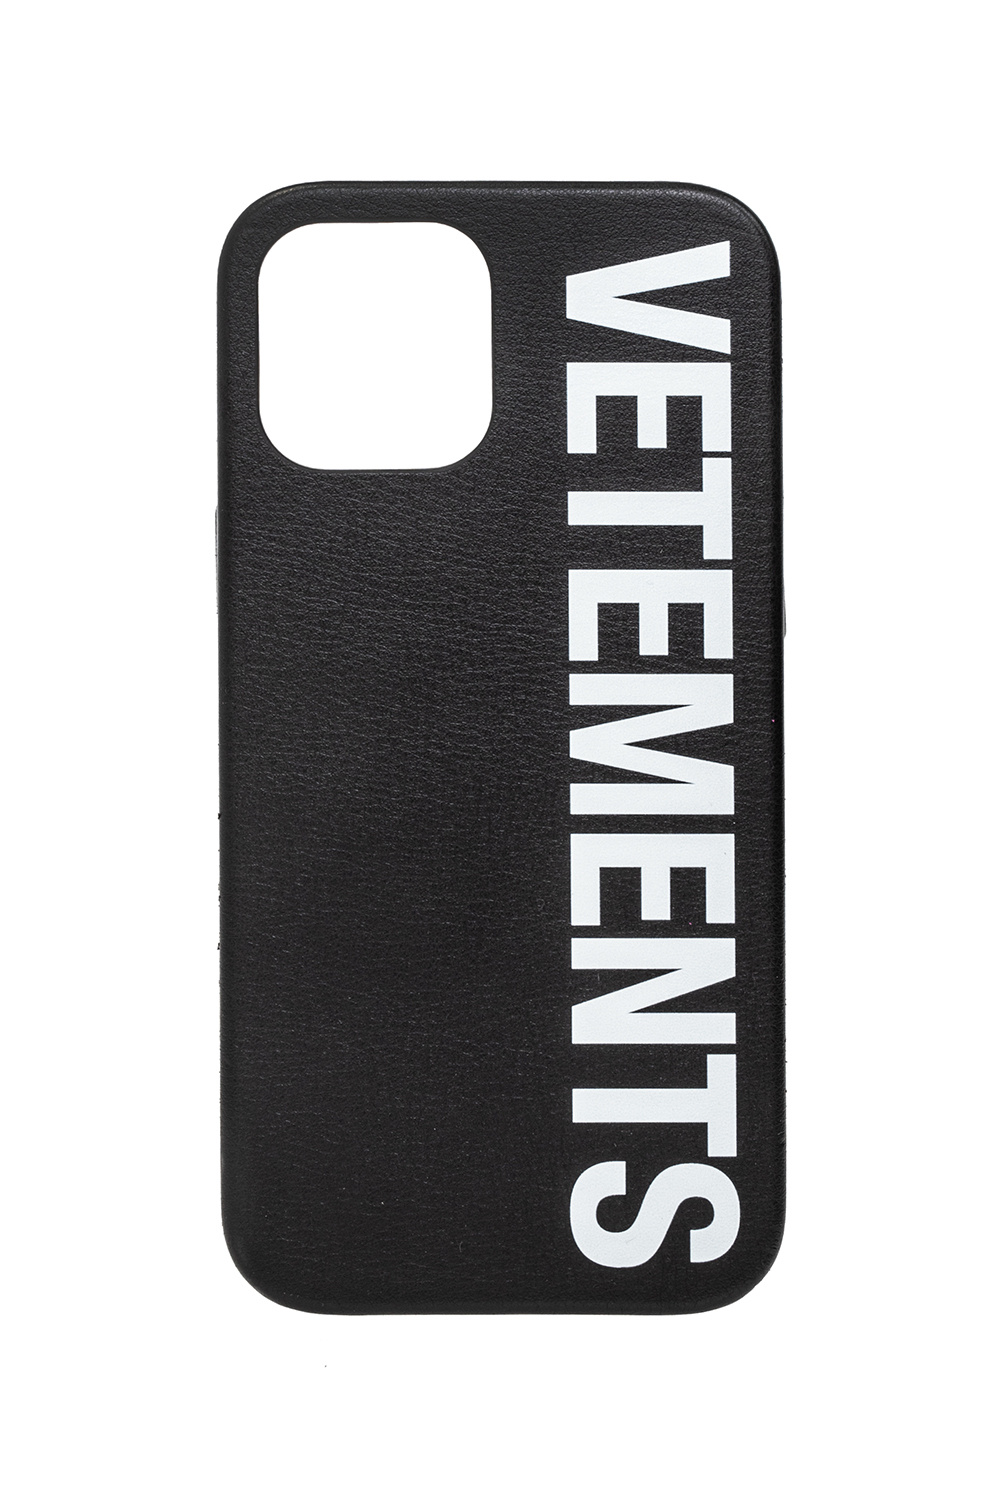 VETEMENTS IN HONOUR OF MOVEMENT AND BREAKING PATTERNS